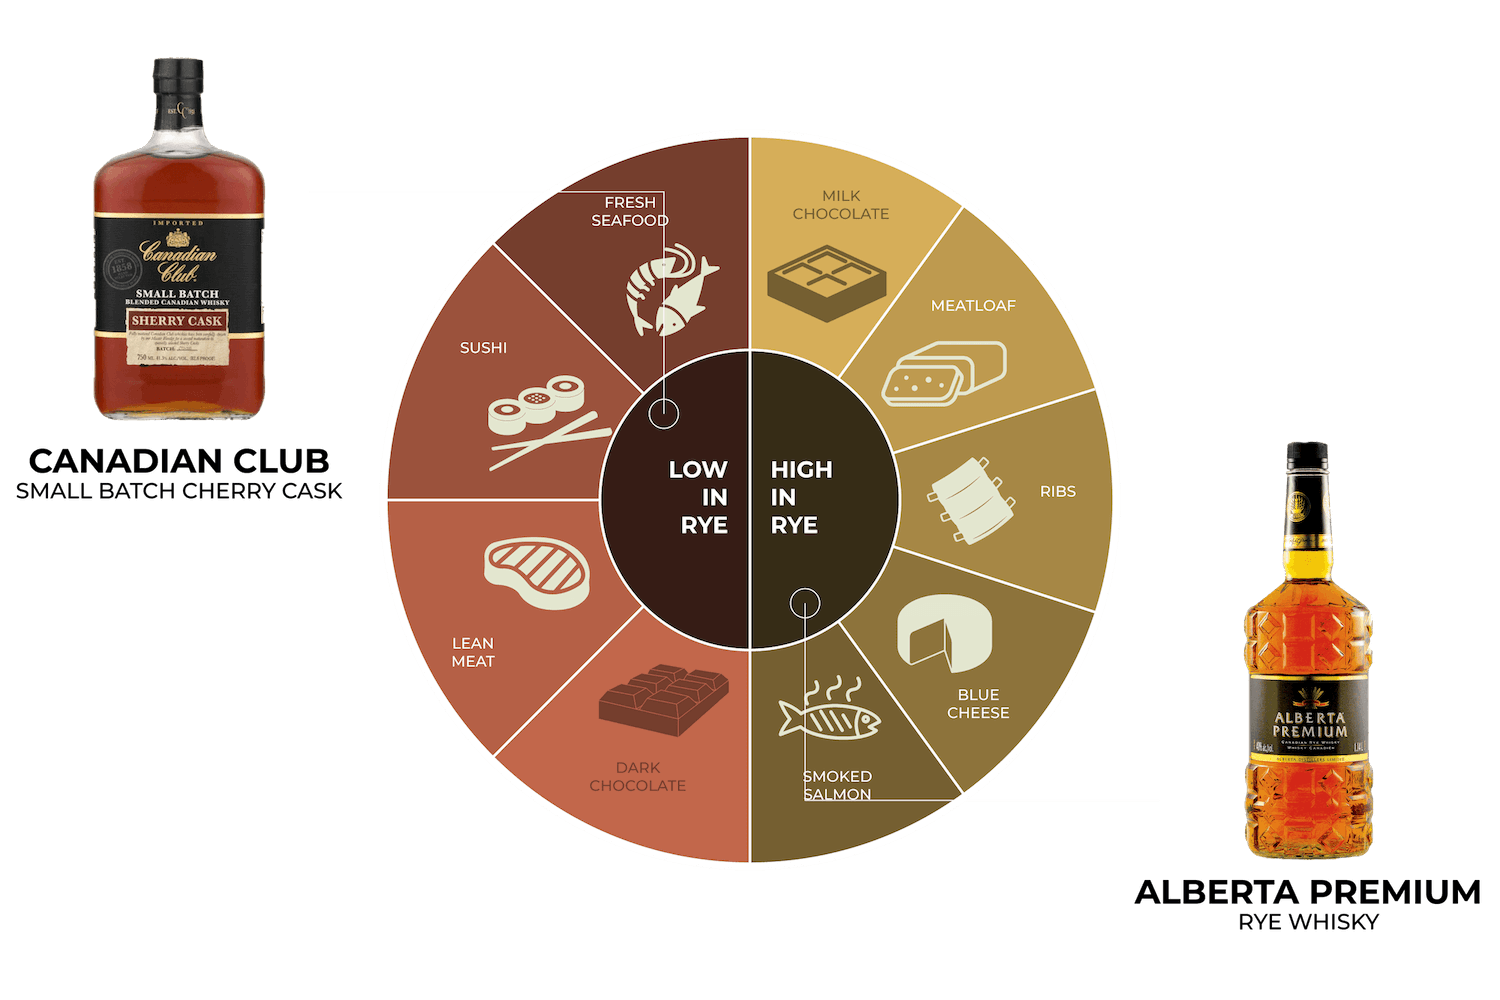 canadian-whisky-food-pairing.png (1500×1000)